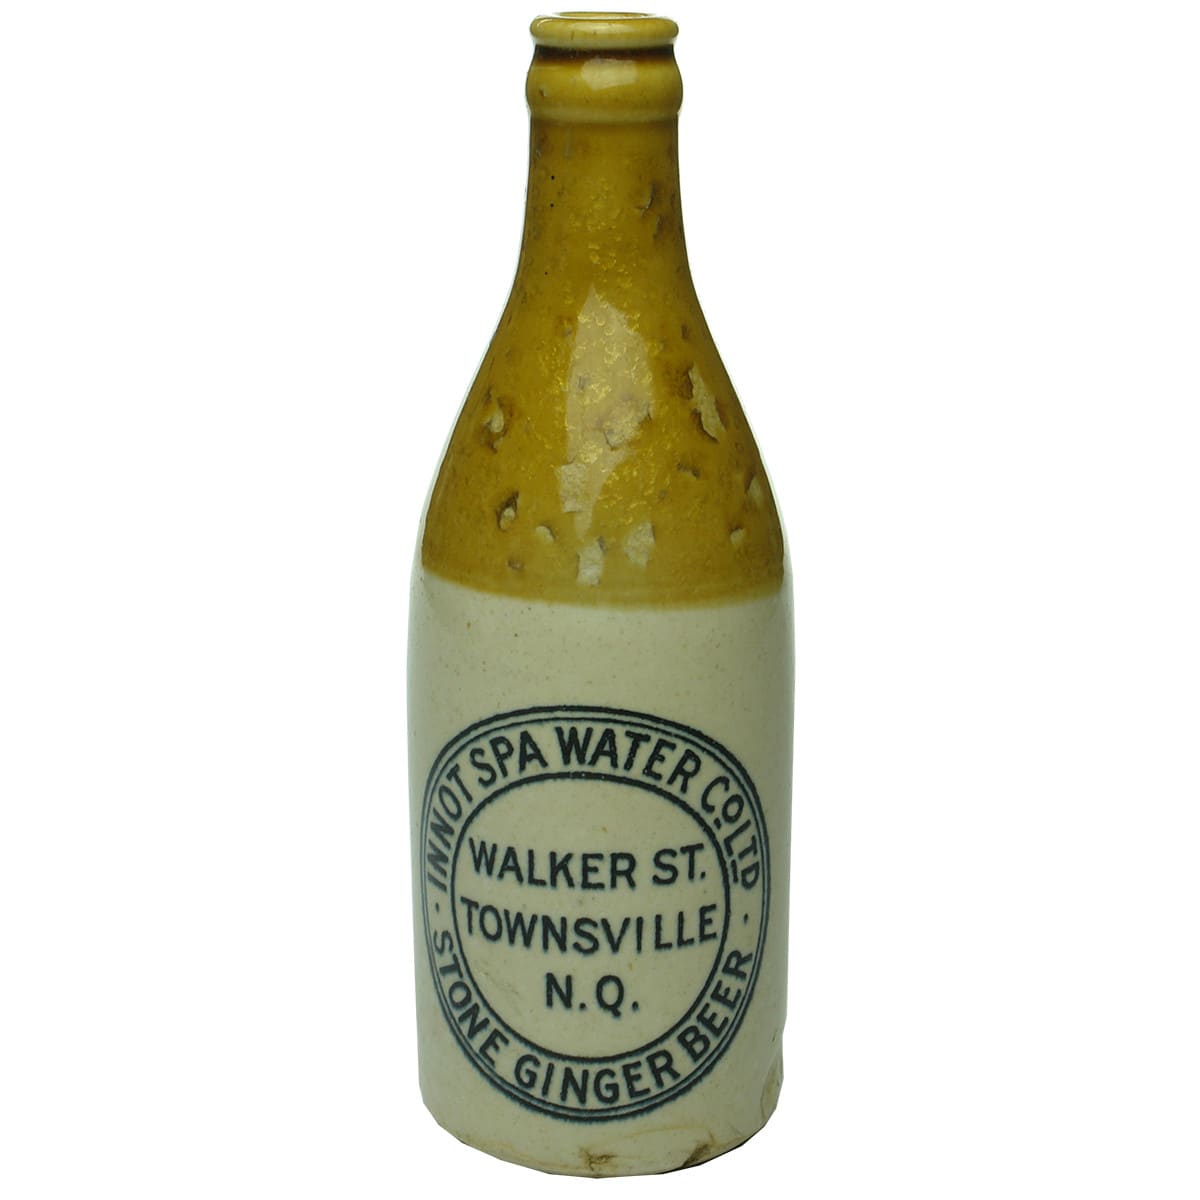 Ginger Beer. Innot Spa Water Co Ltd, Townsville. Govancroft Pottery. Crown Seal. (Queensland)